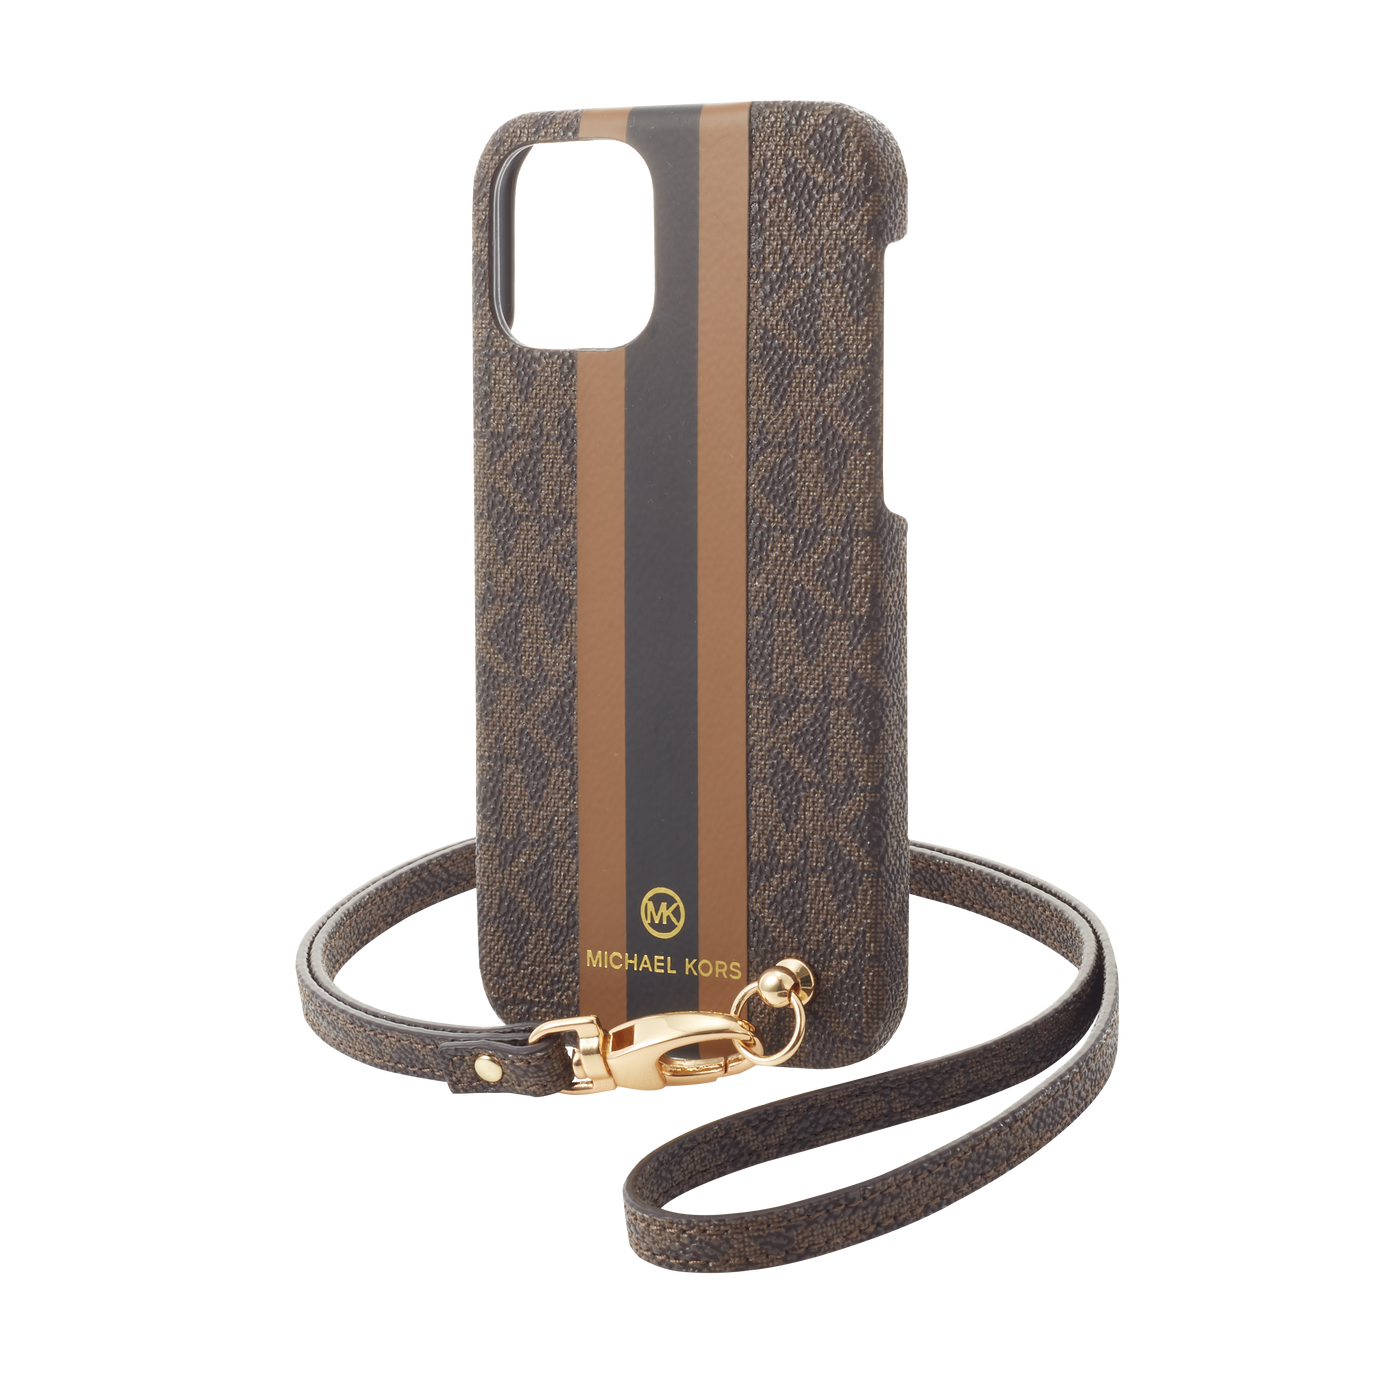 MICHAEL KORS - Slim Wrap Case Stripe with Neck Strap - Magsafe for iPhone 12 Pro Max - Brown